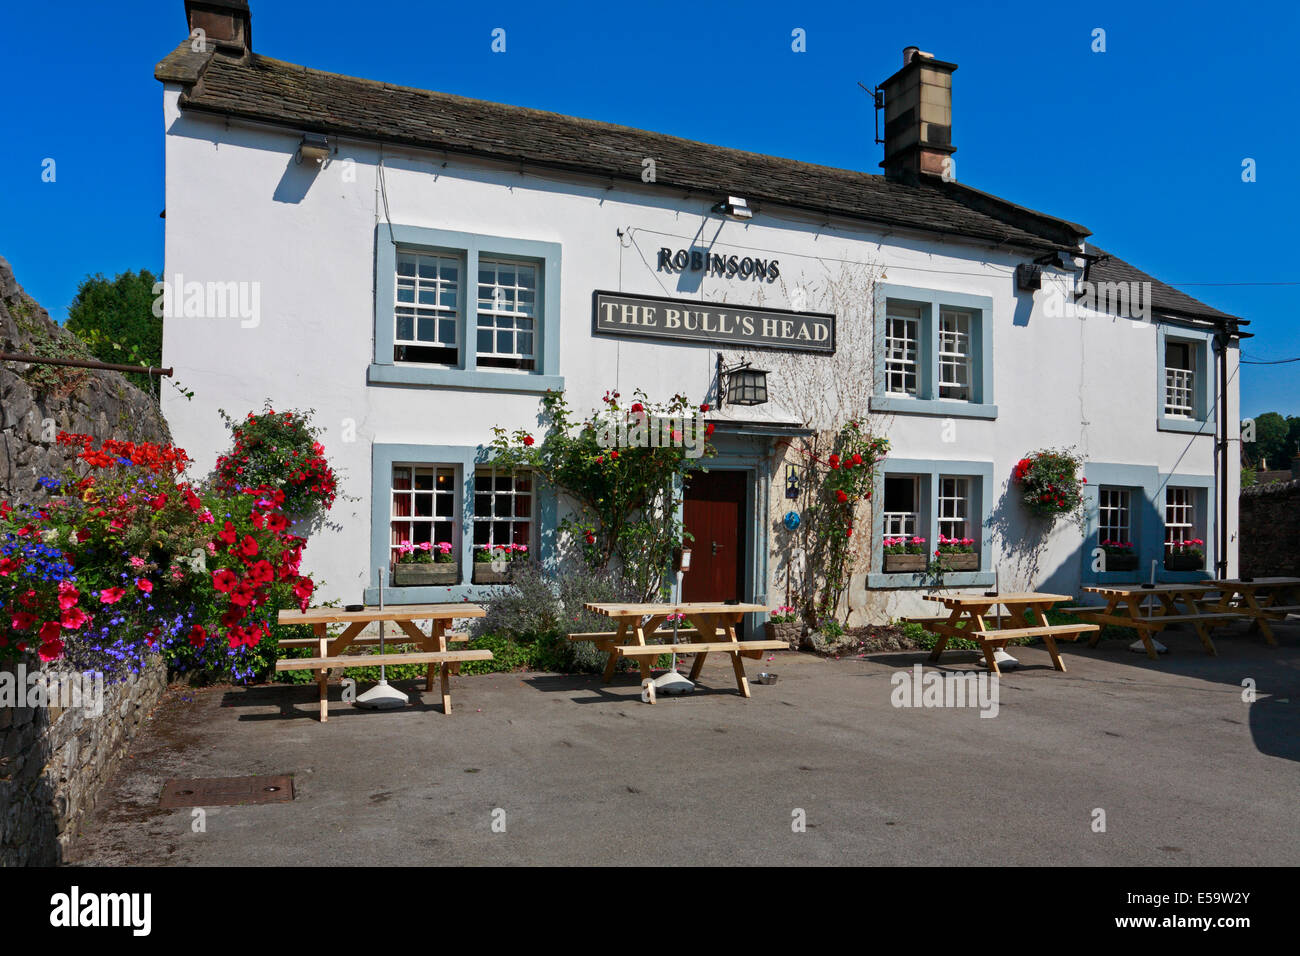 The Bull's Head Ashford in the Water, Derbyshire, Peak District National Park, England, UK. Stock Photo